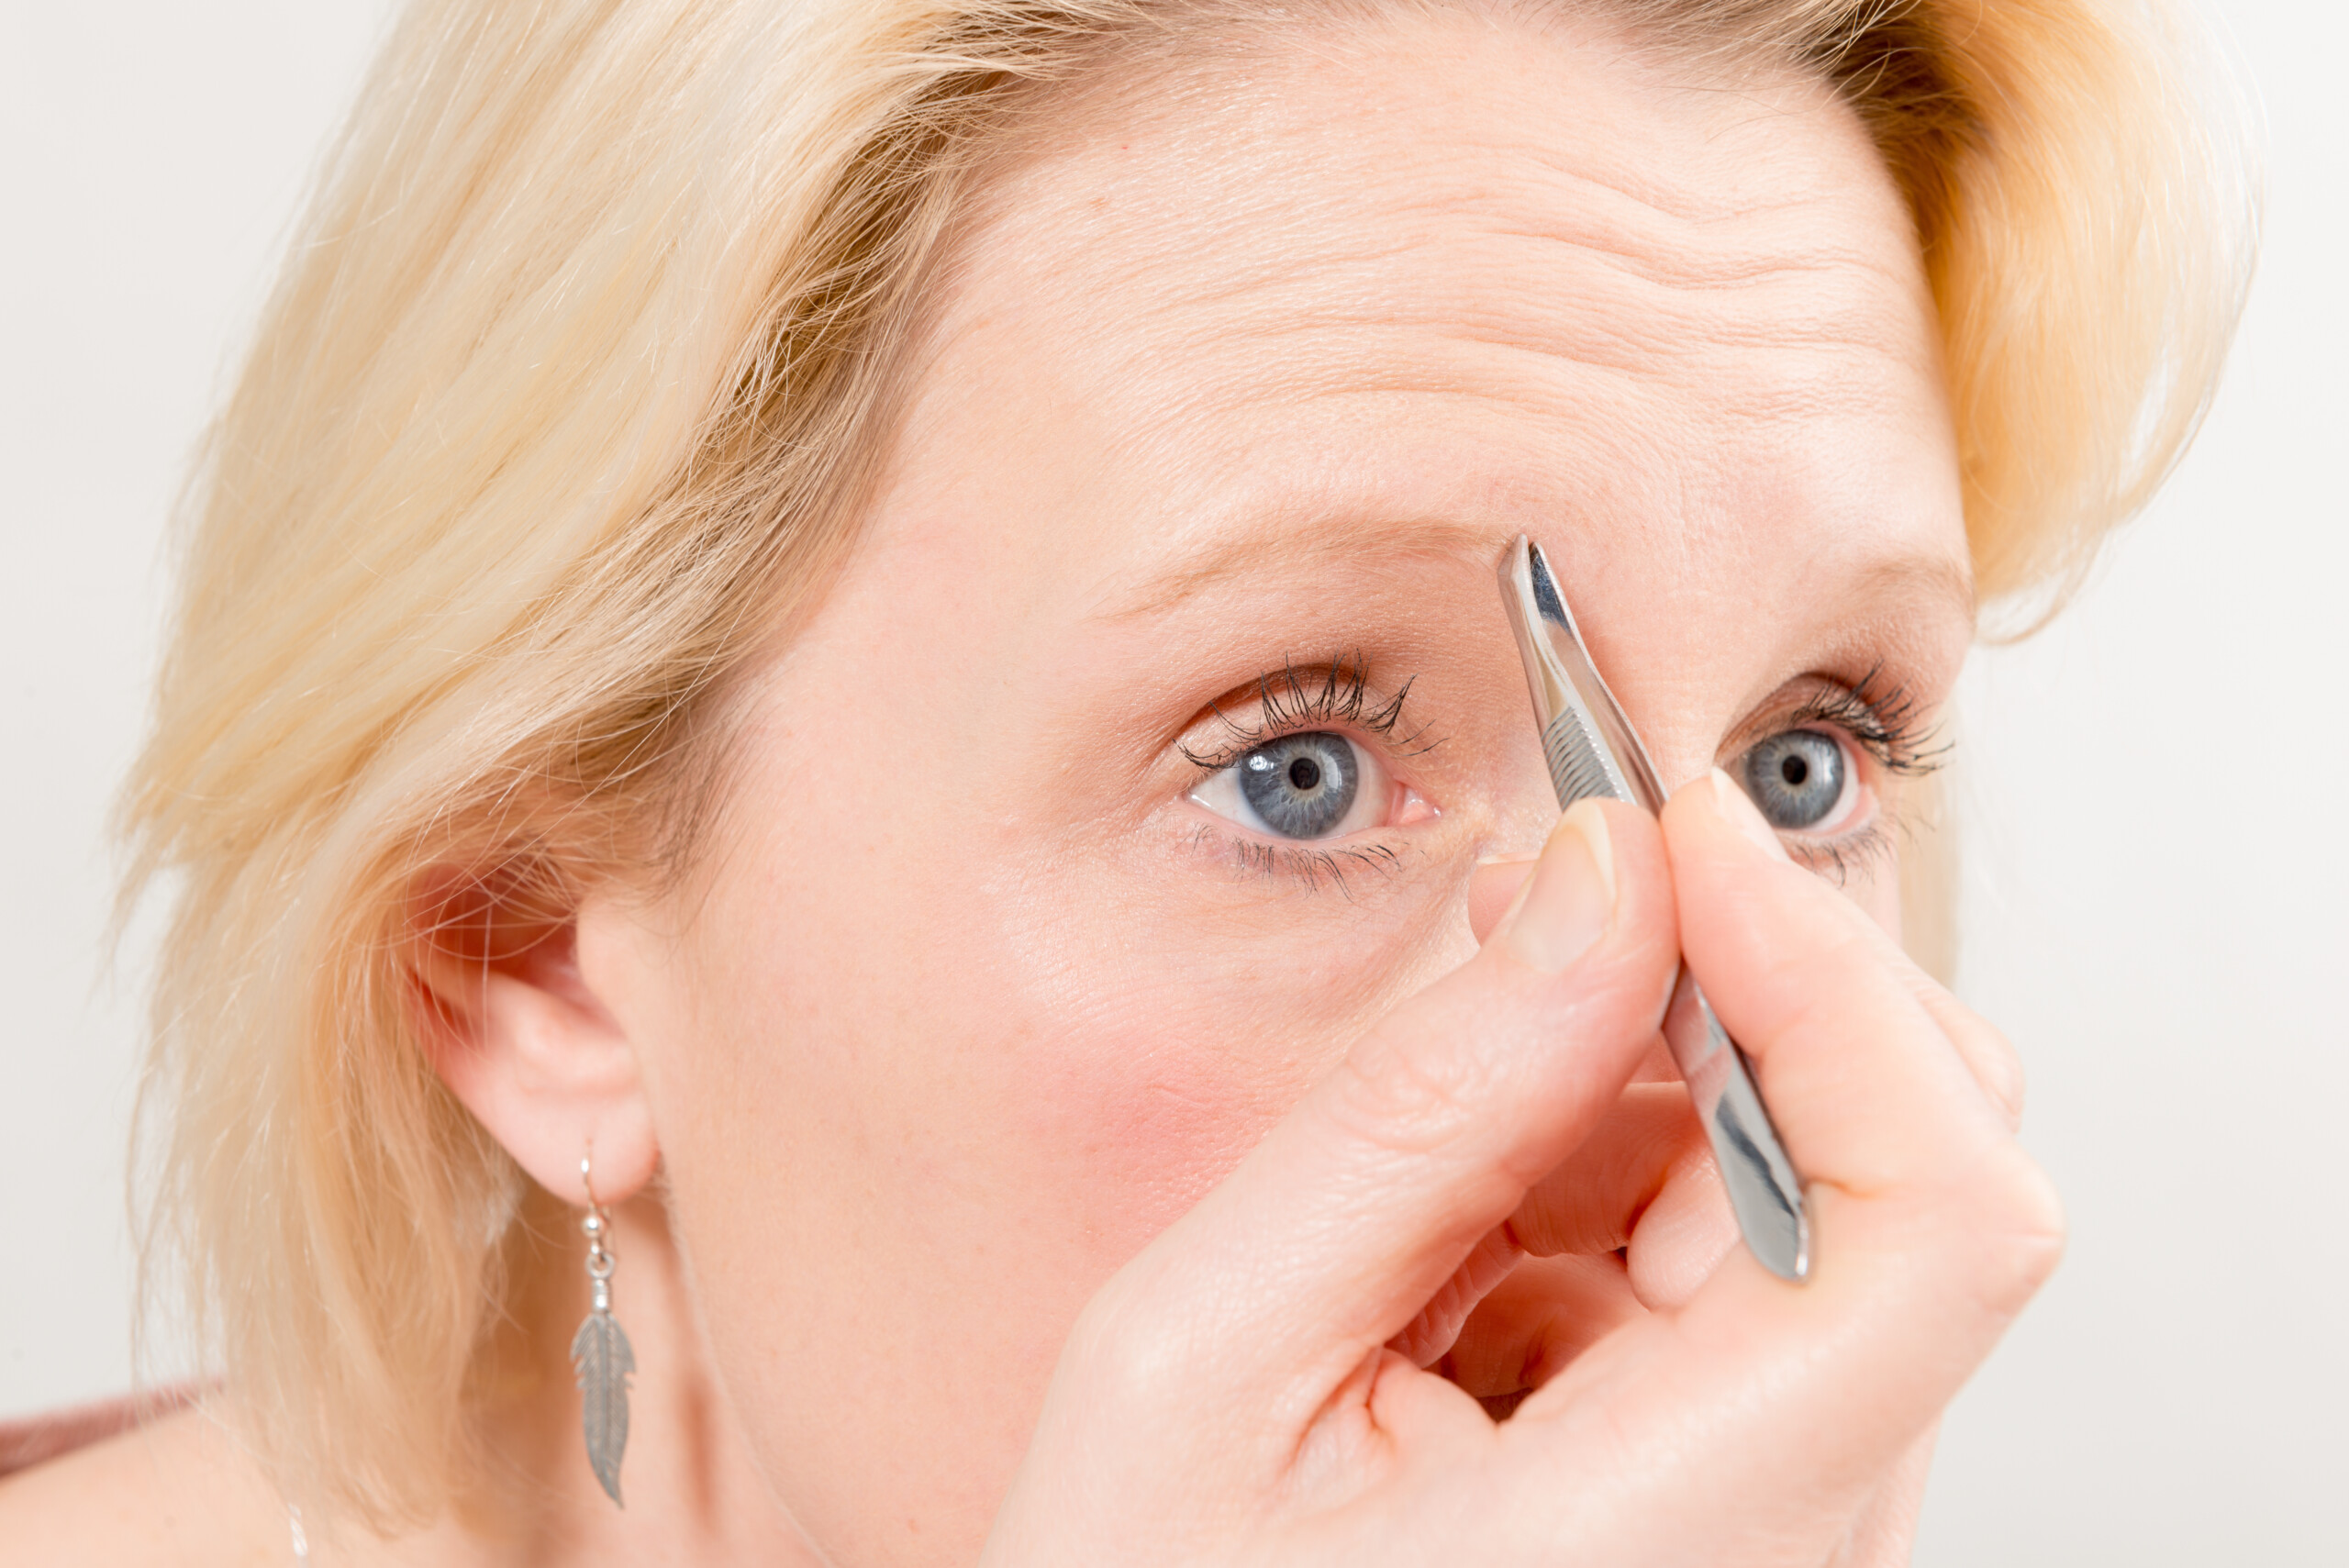 Why Do Light Plucked Eyebrow Hairs Have Dark Roots?